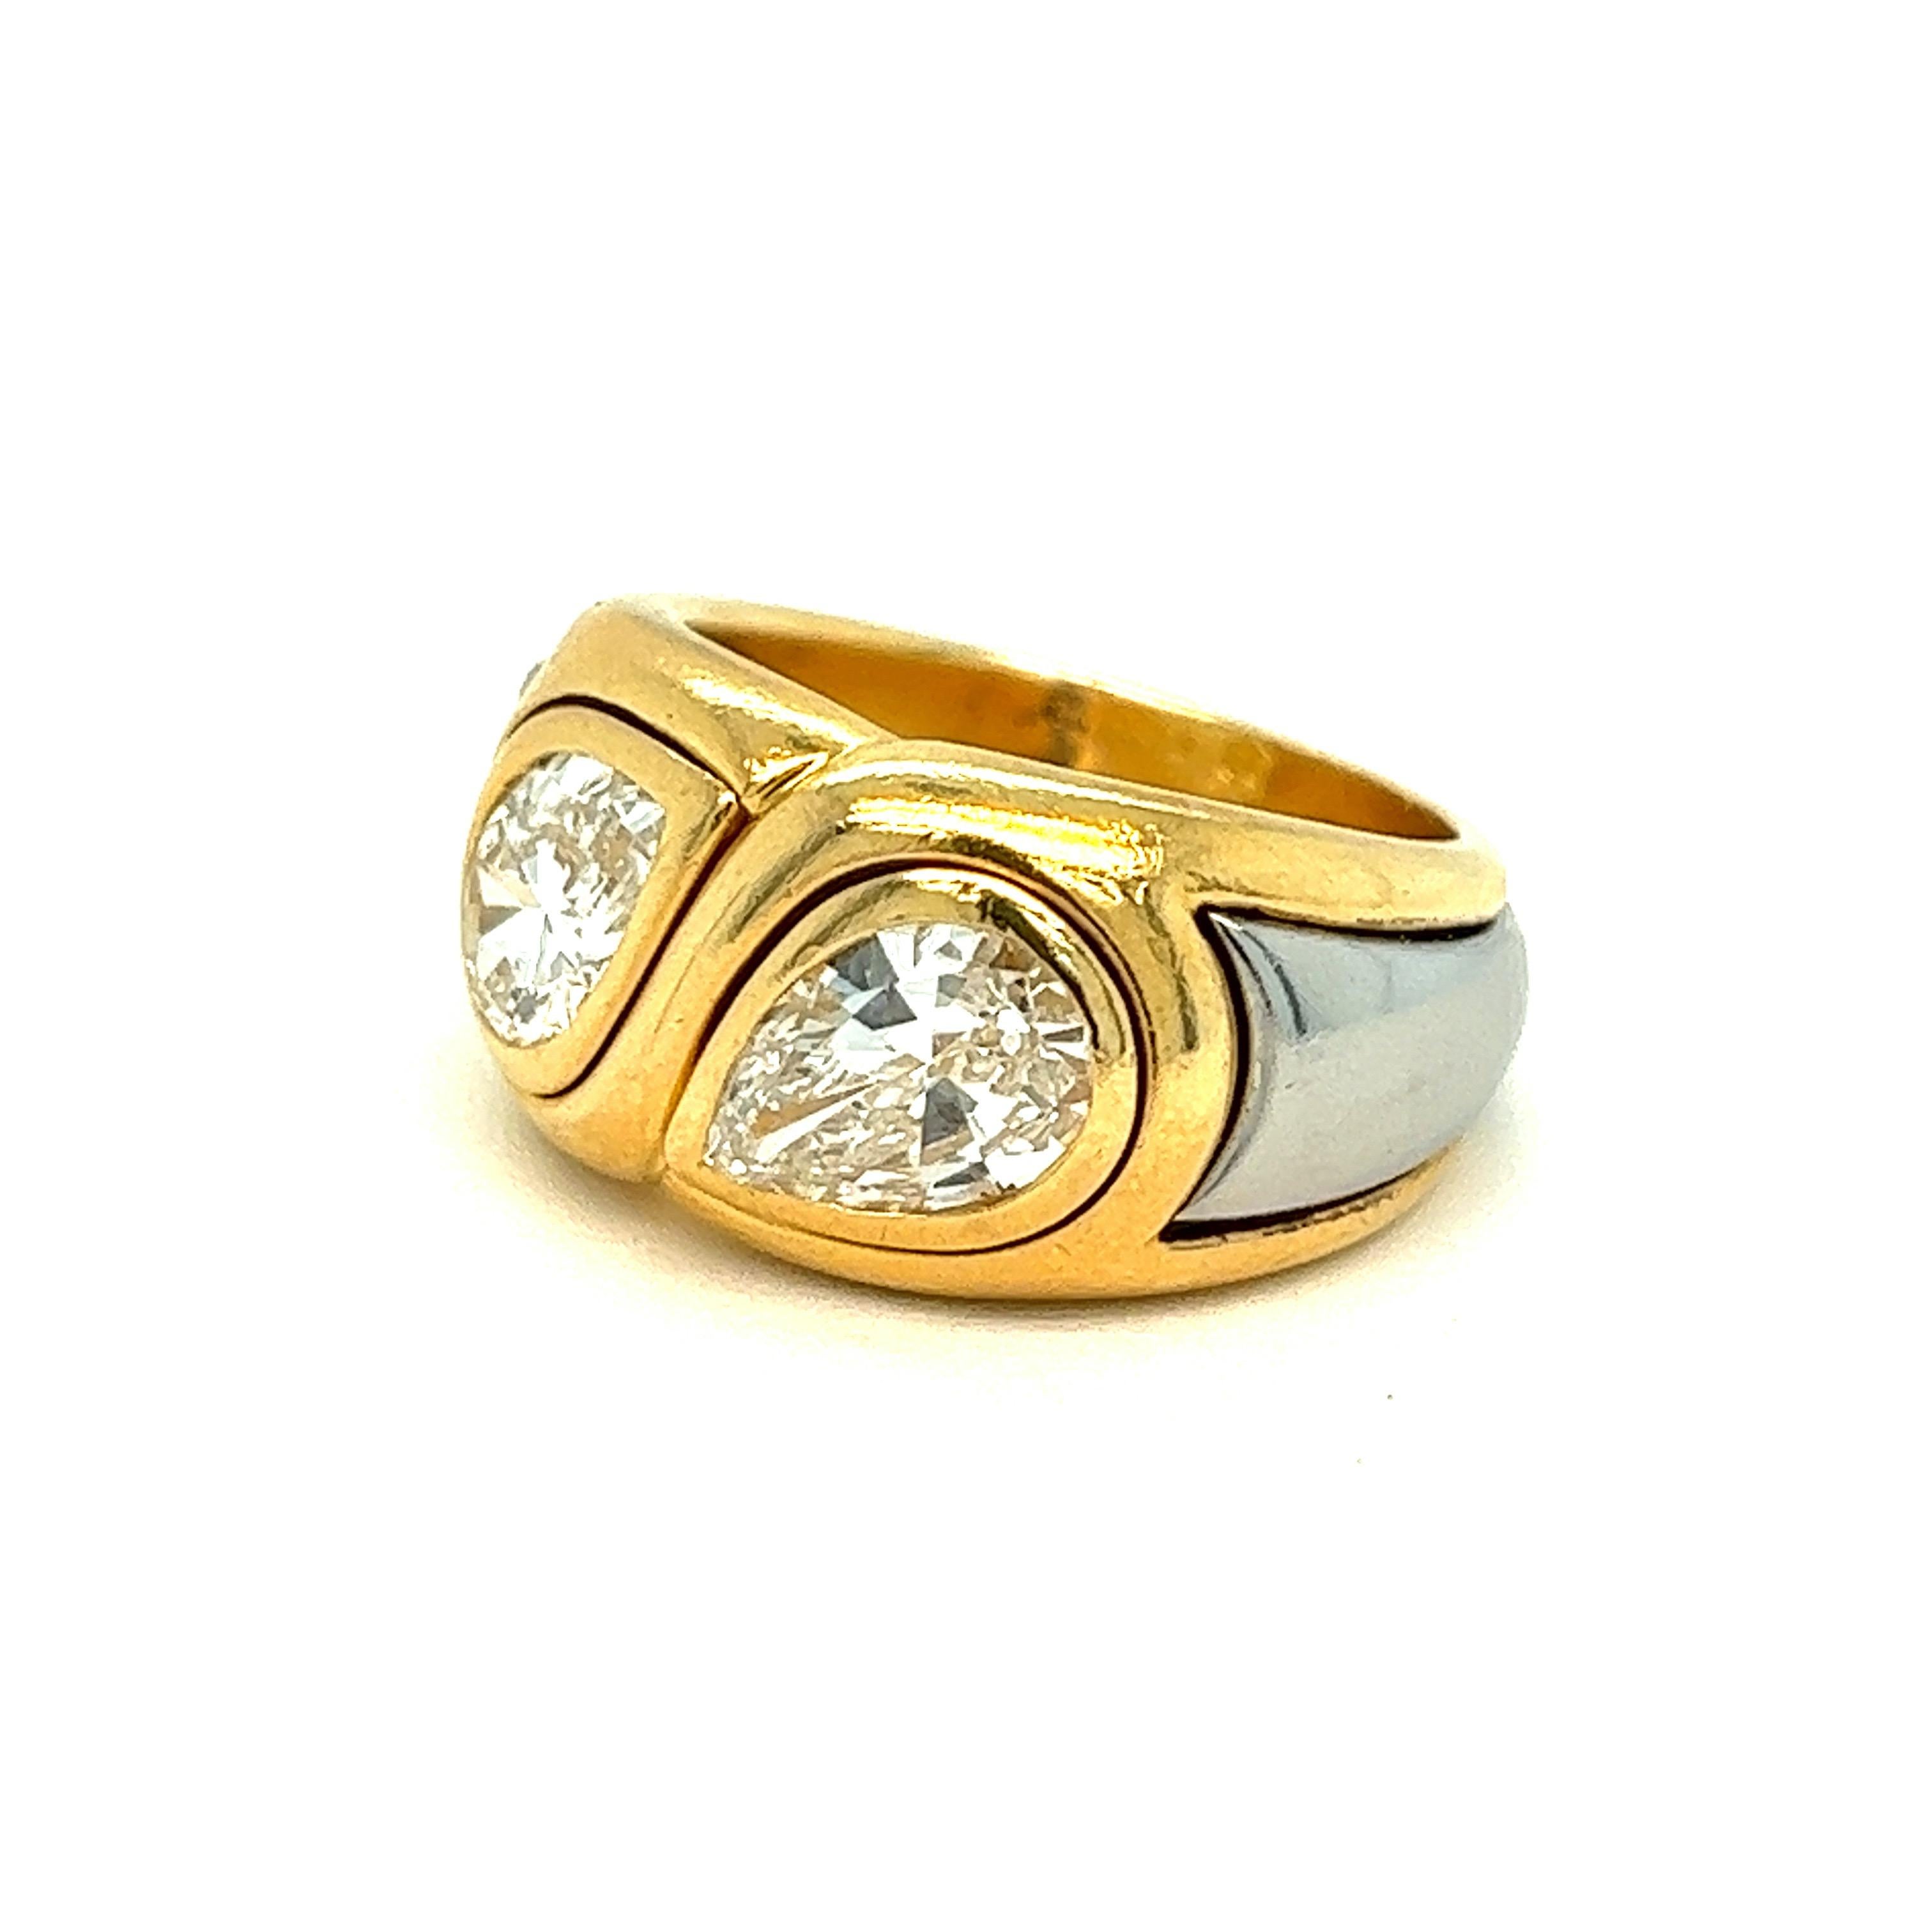 Bvlgari two pear-shaped diamond gold ring

Bezel set pear-shaped diamonds of 2.05 carats, 18 karat yellow and white gold; marked Bvlgari, maker's mark, Italian assay marks, cts 2.05

Size: 6.25-6.5 US; top width 1.1 cm
Total weight: 13.5 grams